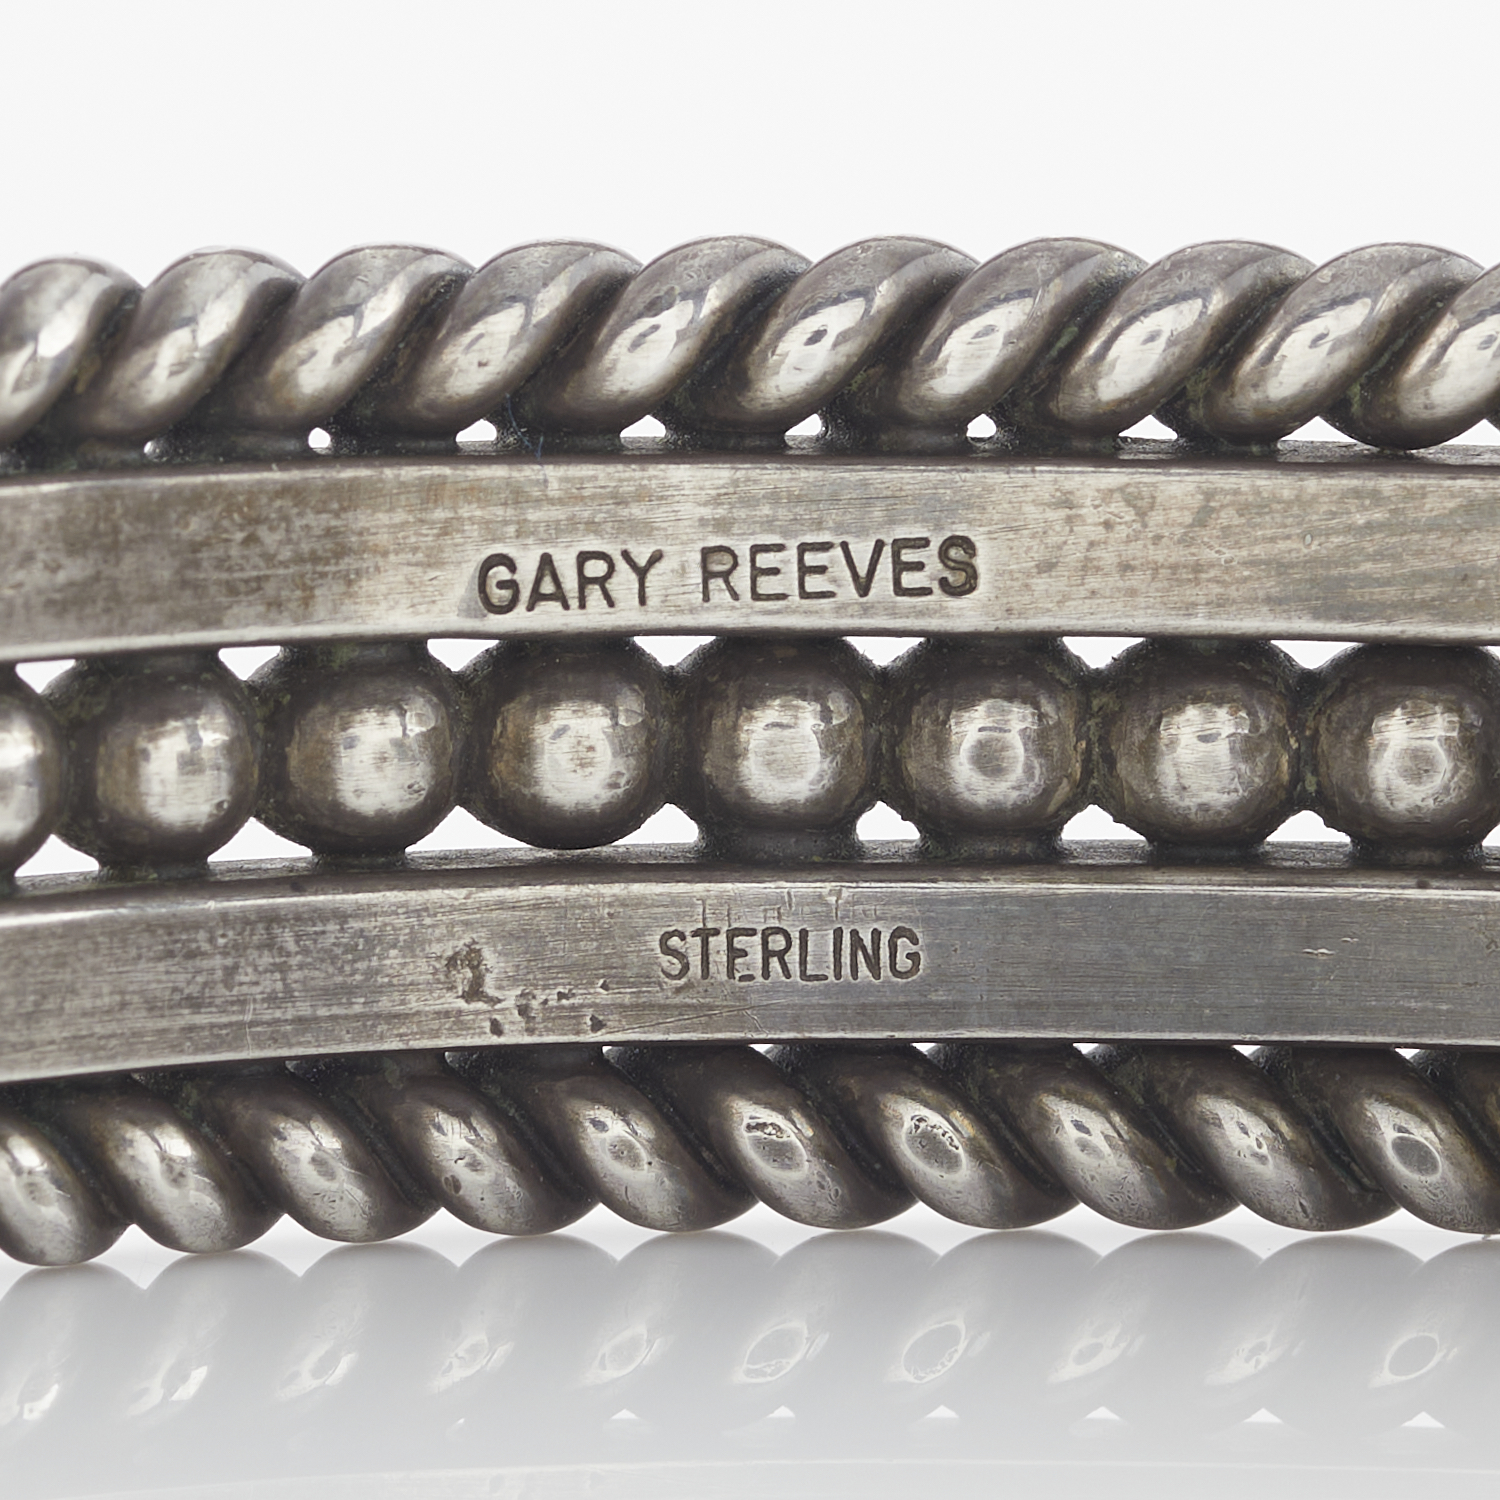 Gary Reeves Sterling Silver Bangle - Image 7 of 10